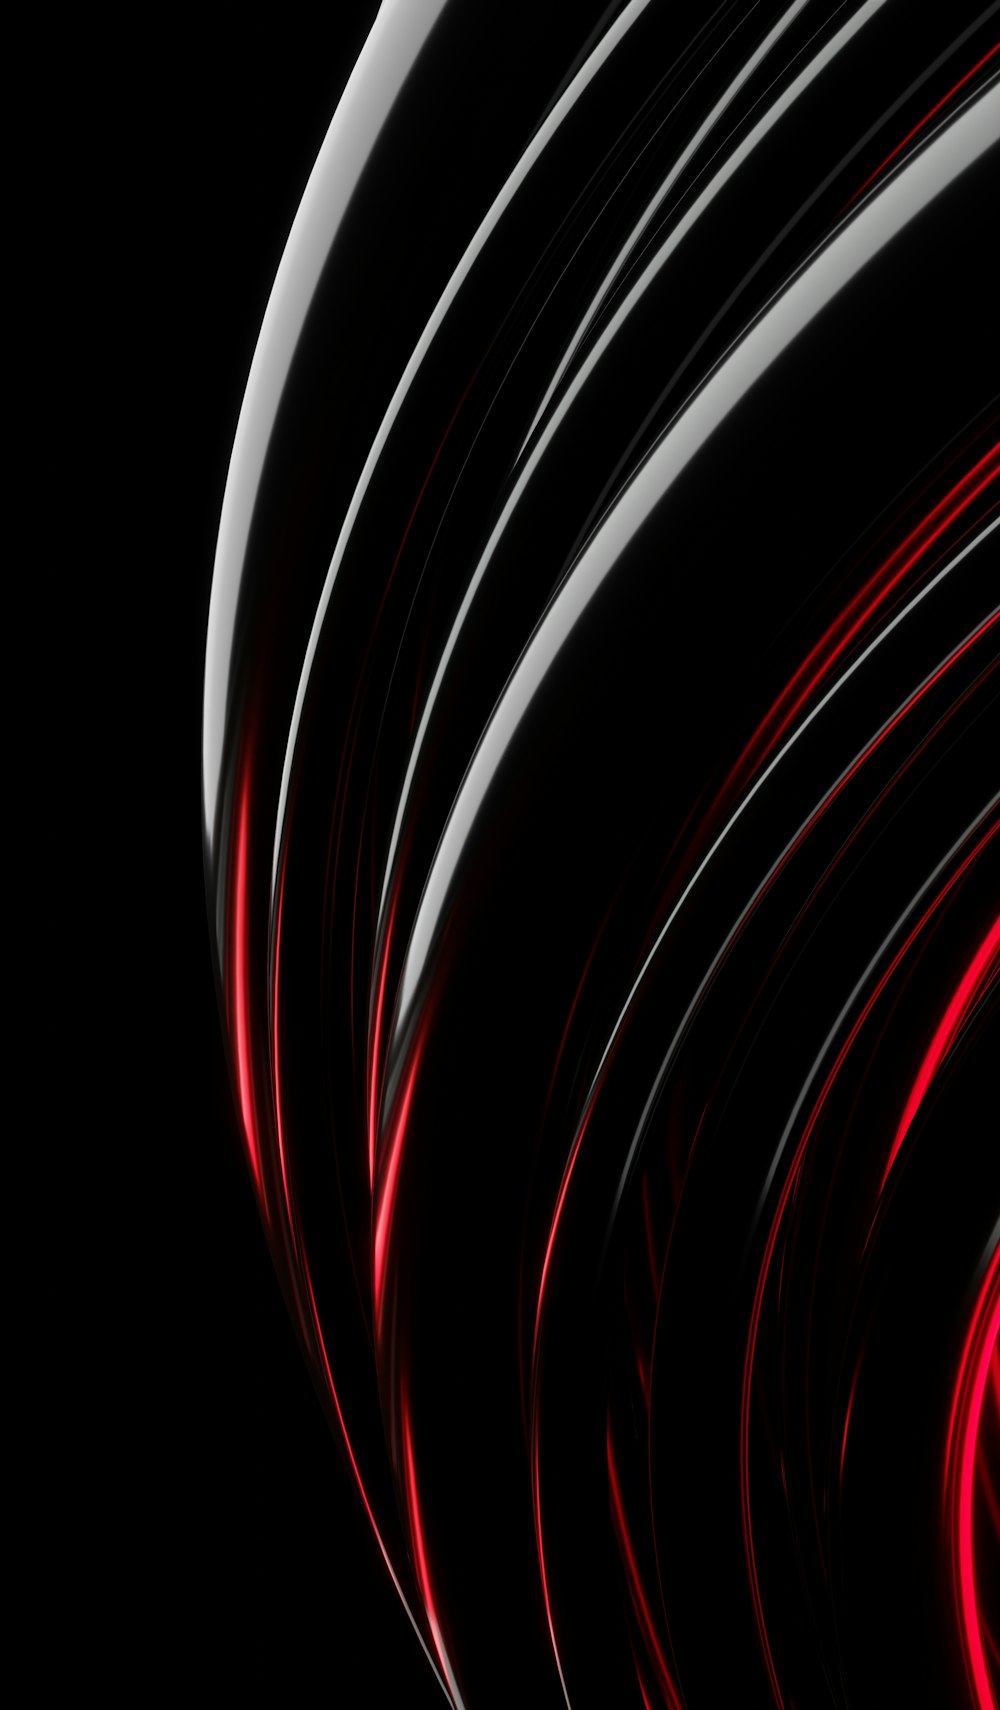 a black background with red and white lines